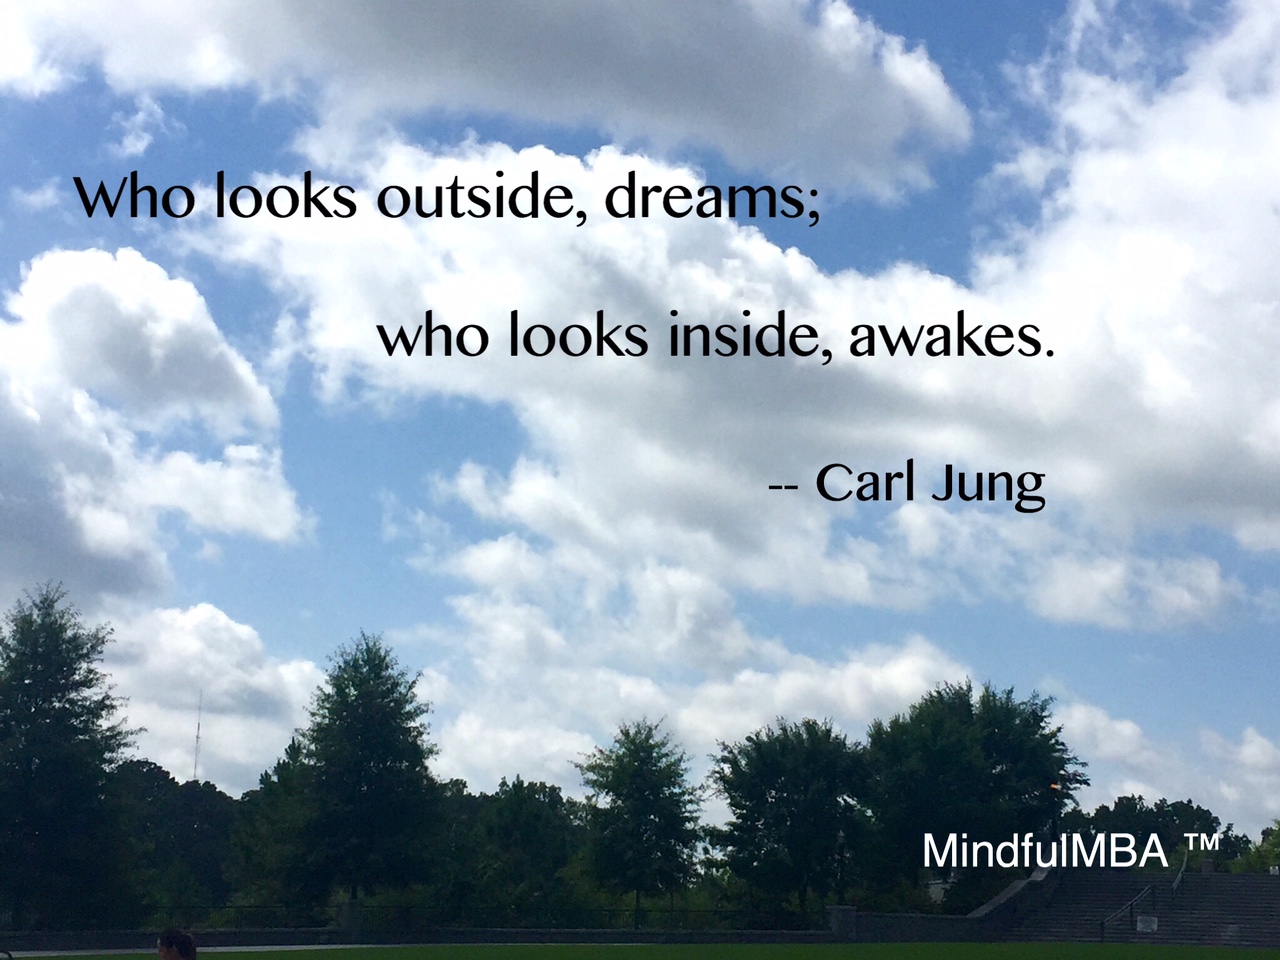 carl-jung-awakes-quote-w-tag